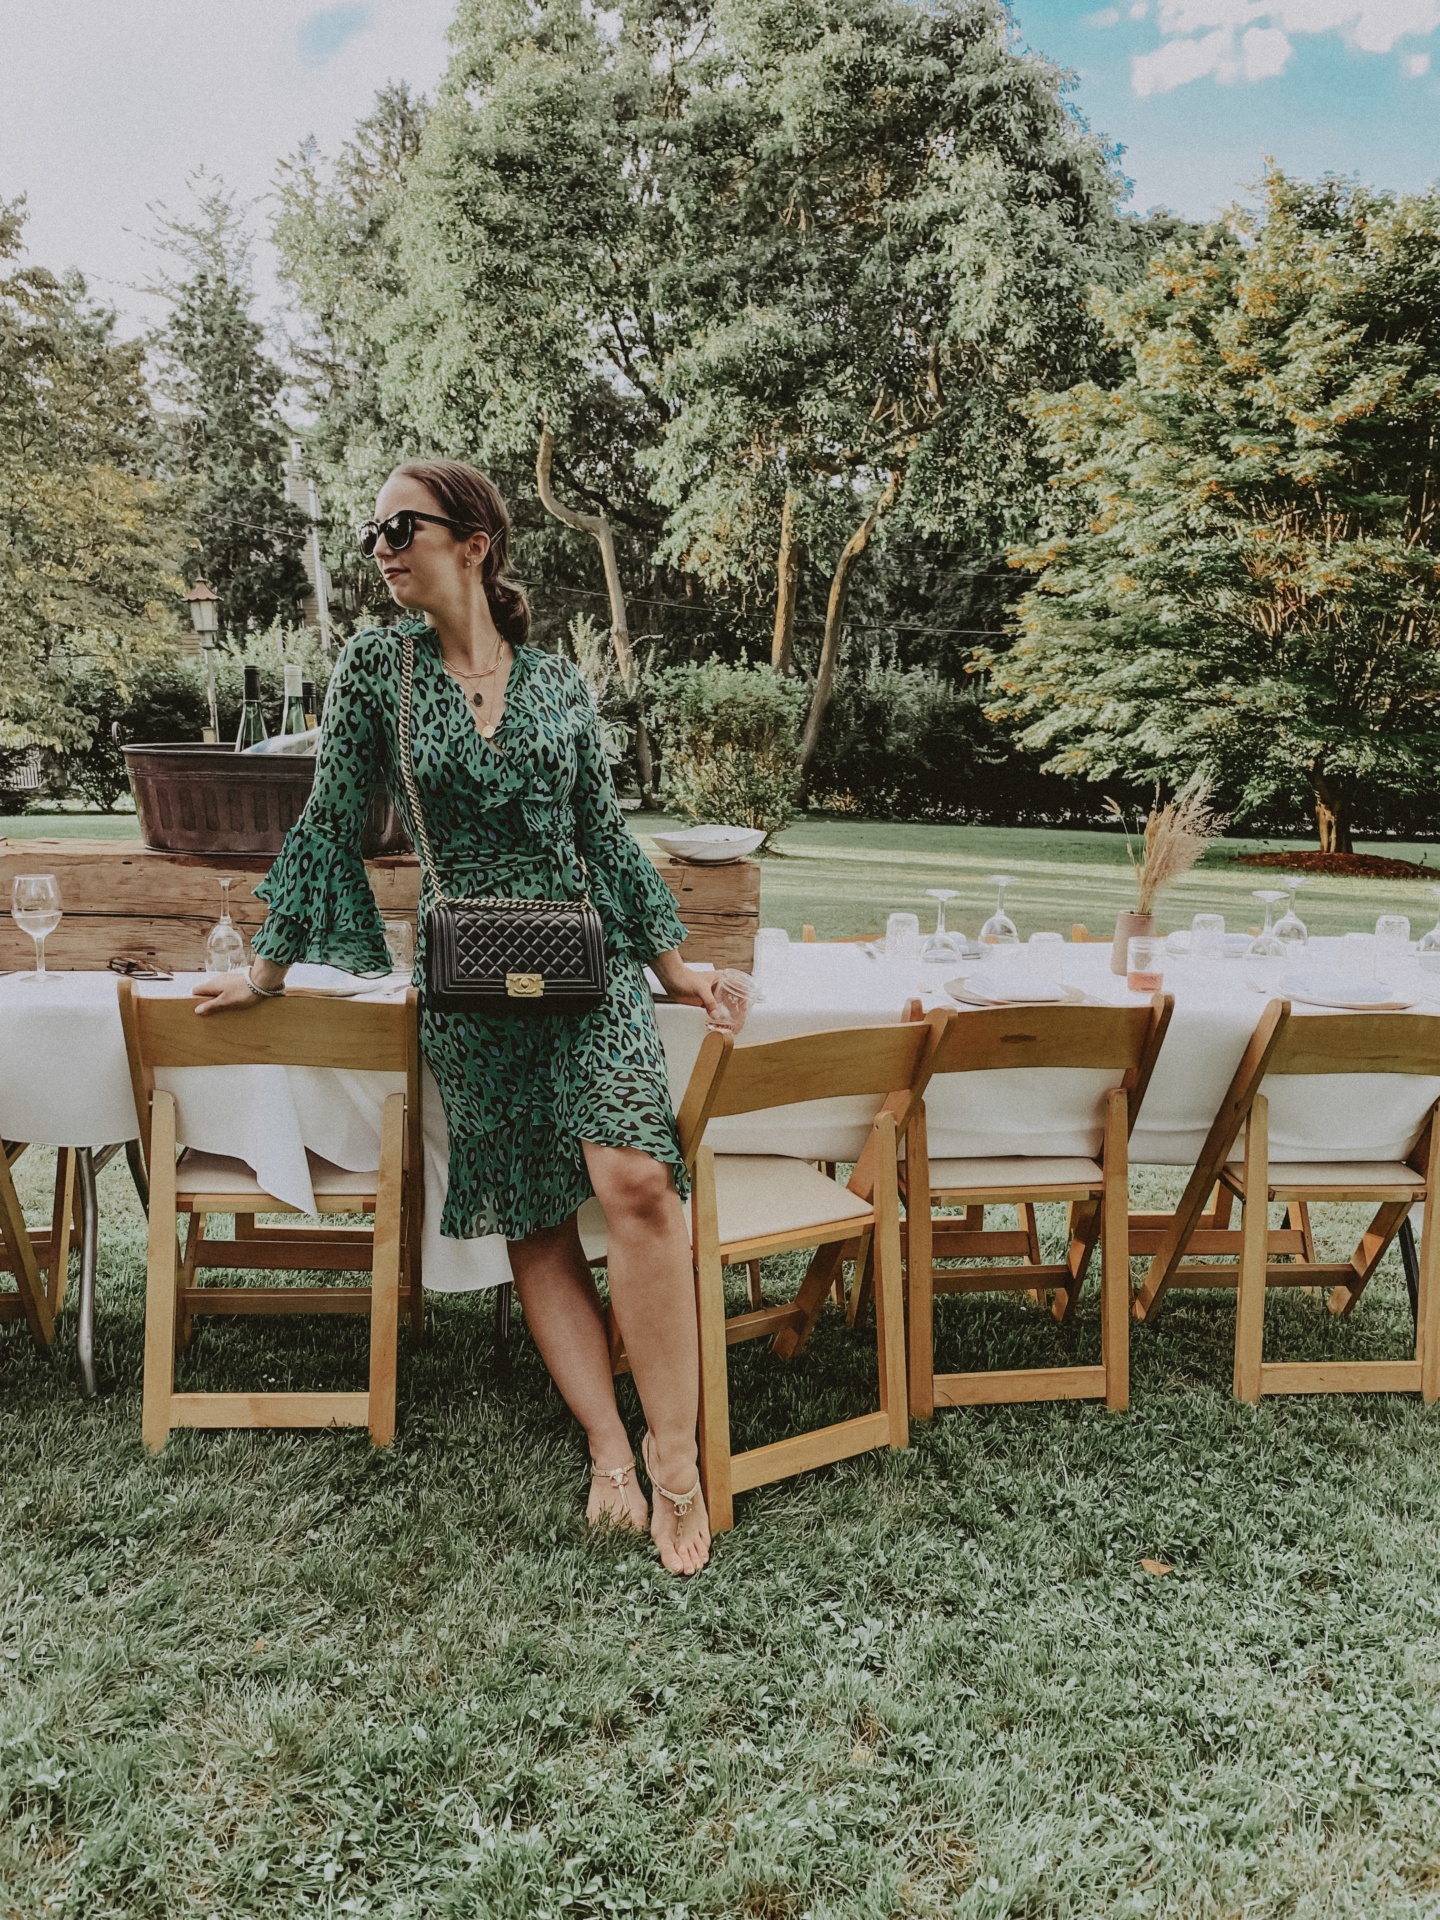 Wood Fire Food: A Top-Notch Connecting Opportunity In Westchester - Simply by Simone - Simone Piliero - Westchester County - Pop Up Dinner - Event - Summer #dinner #food #summerstyle #dress #leopard #summeroutfit #westchester #newyork #summer #dining #tablescape #chanel